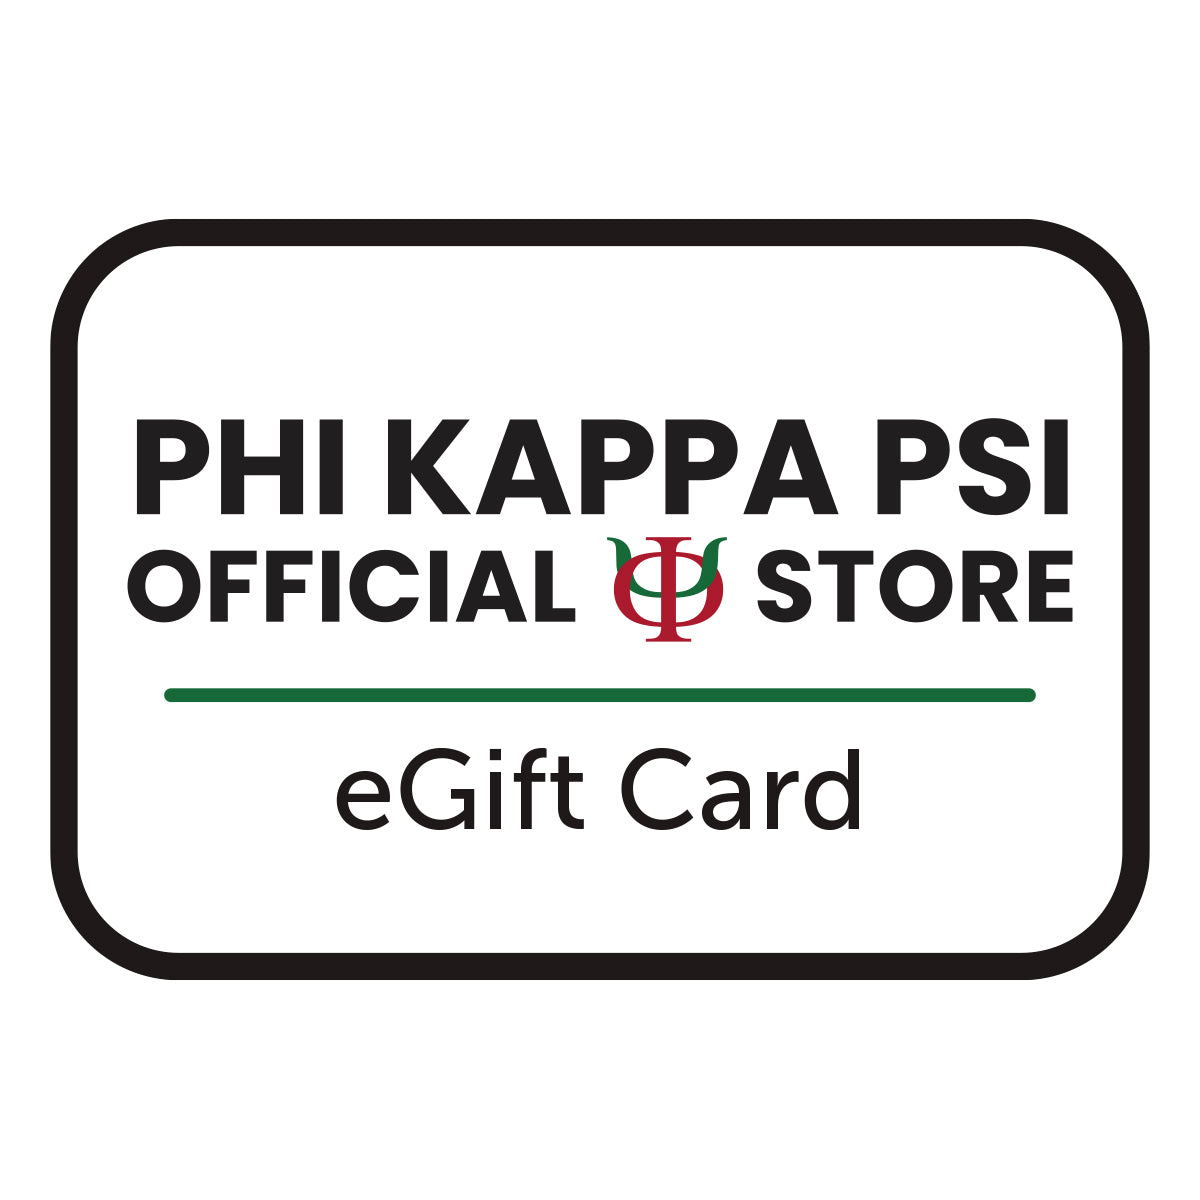 Phi Kappa Psi Official Store Gift Card